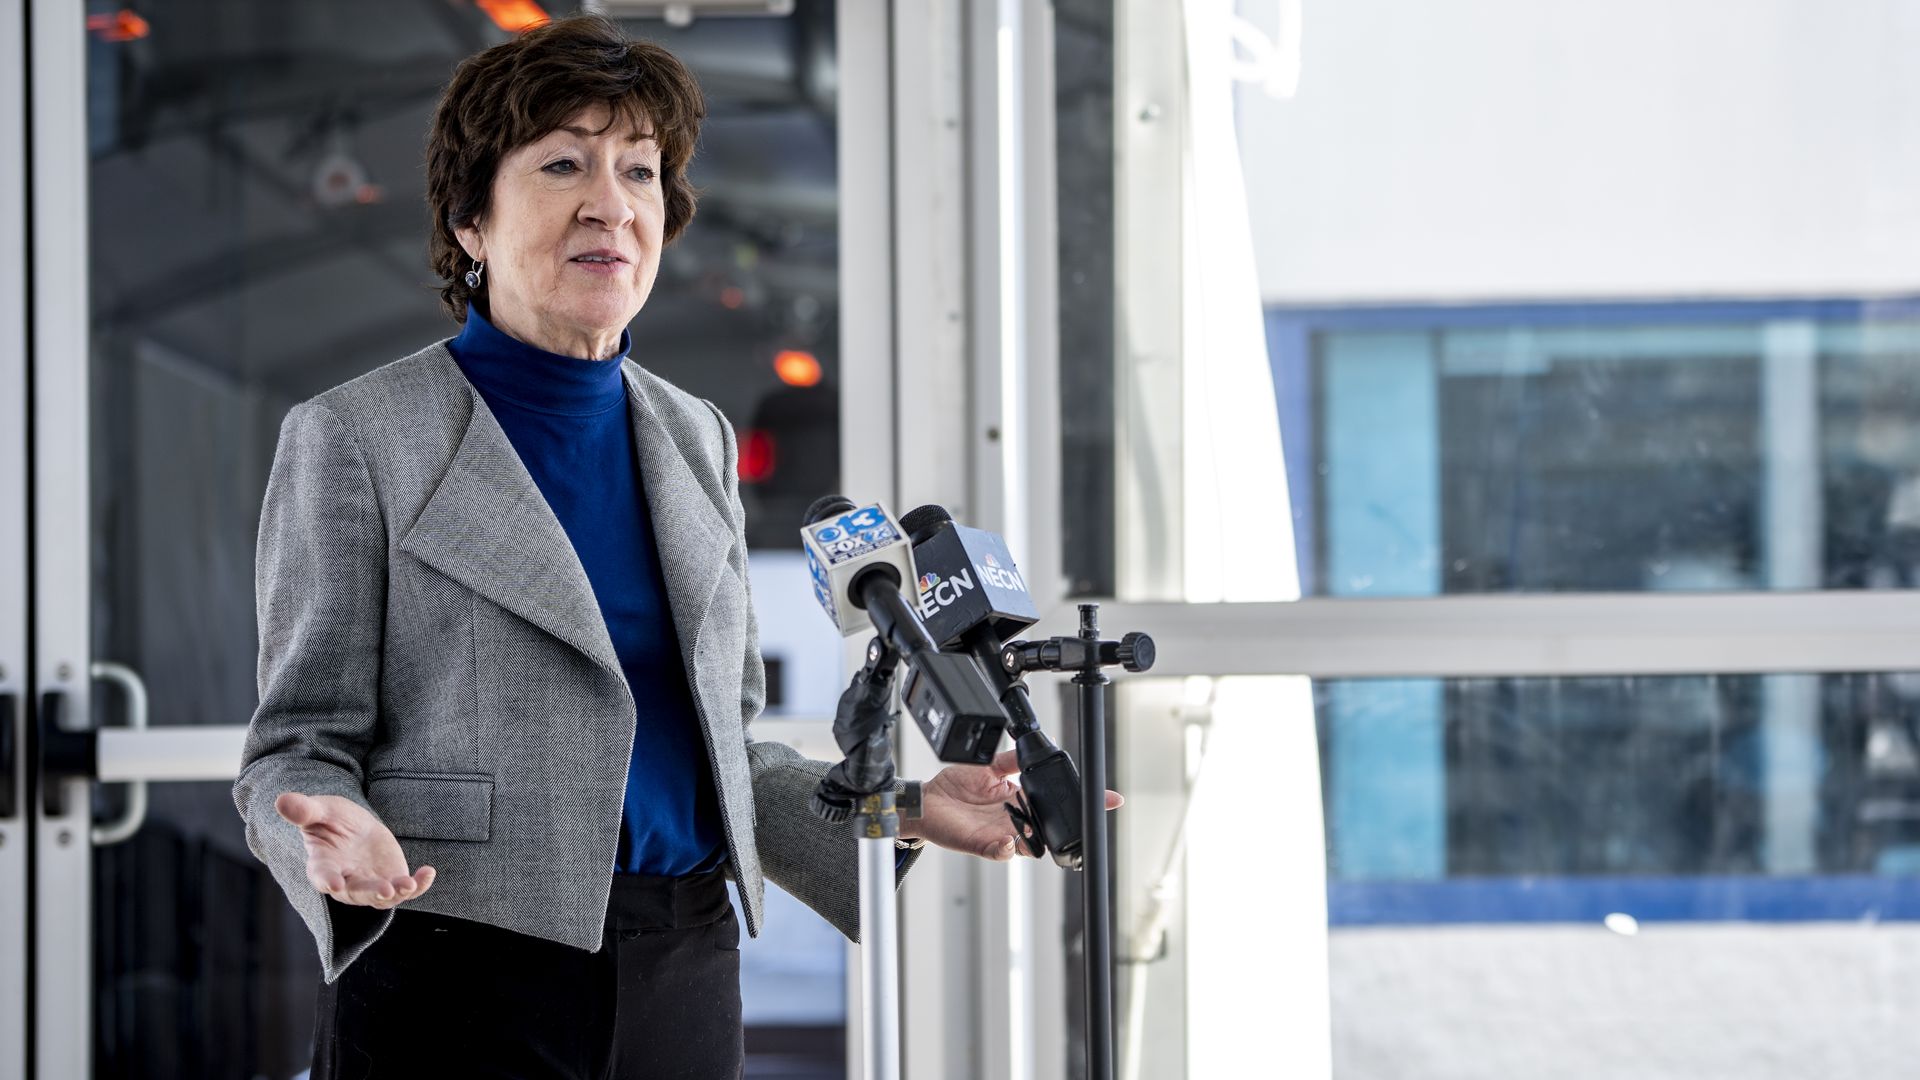 Senator Susan Collins (R-ME) briefs the press after touring the Abbott Coronavirus (COVID-19) Test Manufacturing Plant on January 26, 2022 in Westbrook, Maine